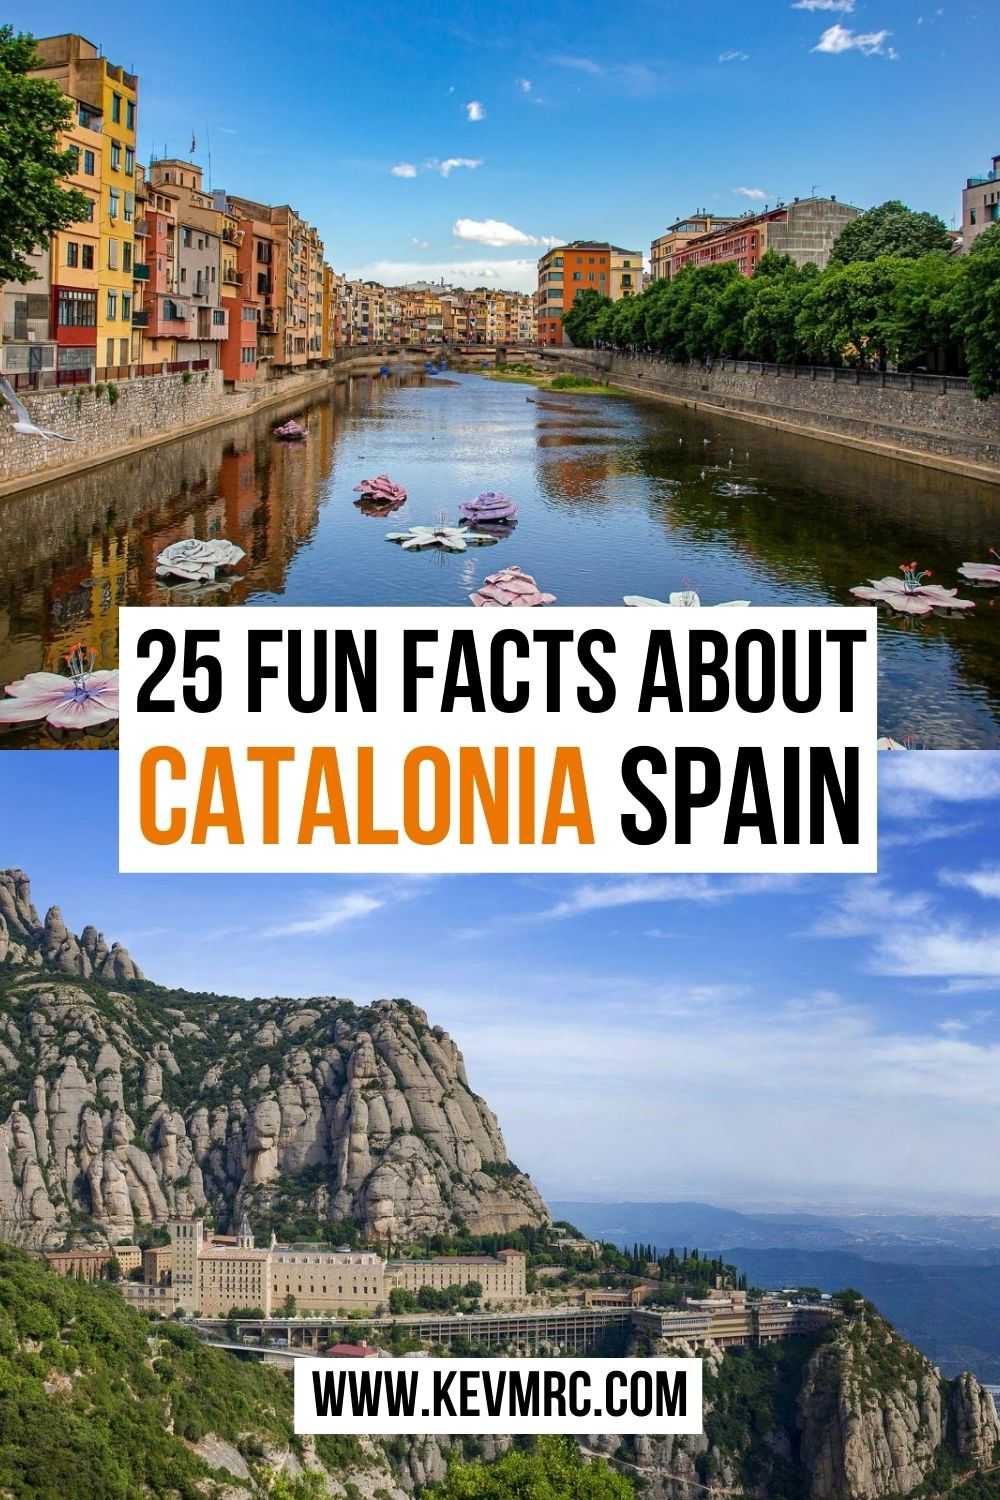 Catalonia is one of the autonomous communities of Spain, located in the northeast of the country on the Mediterranean coast. Learn more with these 25 interesting facts about Catalonia Spain! catalonia spain facts | catalonia facts | spain facts fun | fun facts about spain #spainfacts #catalonia